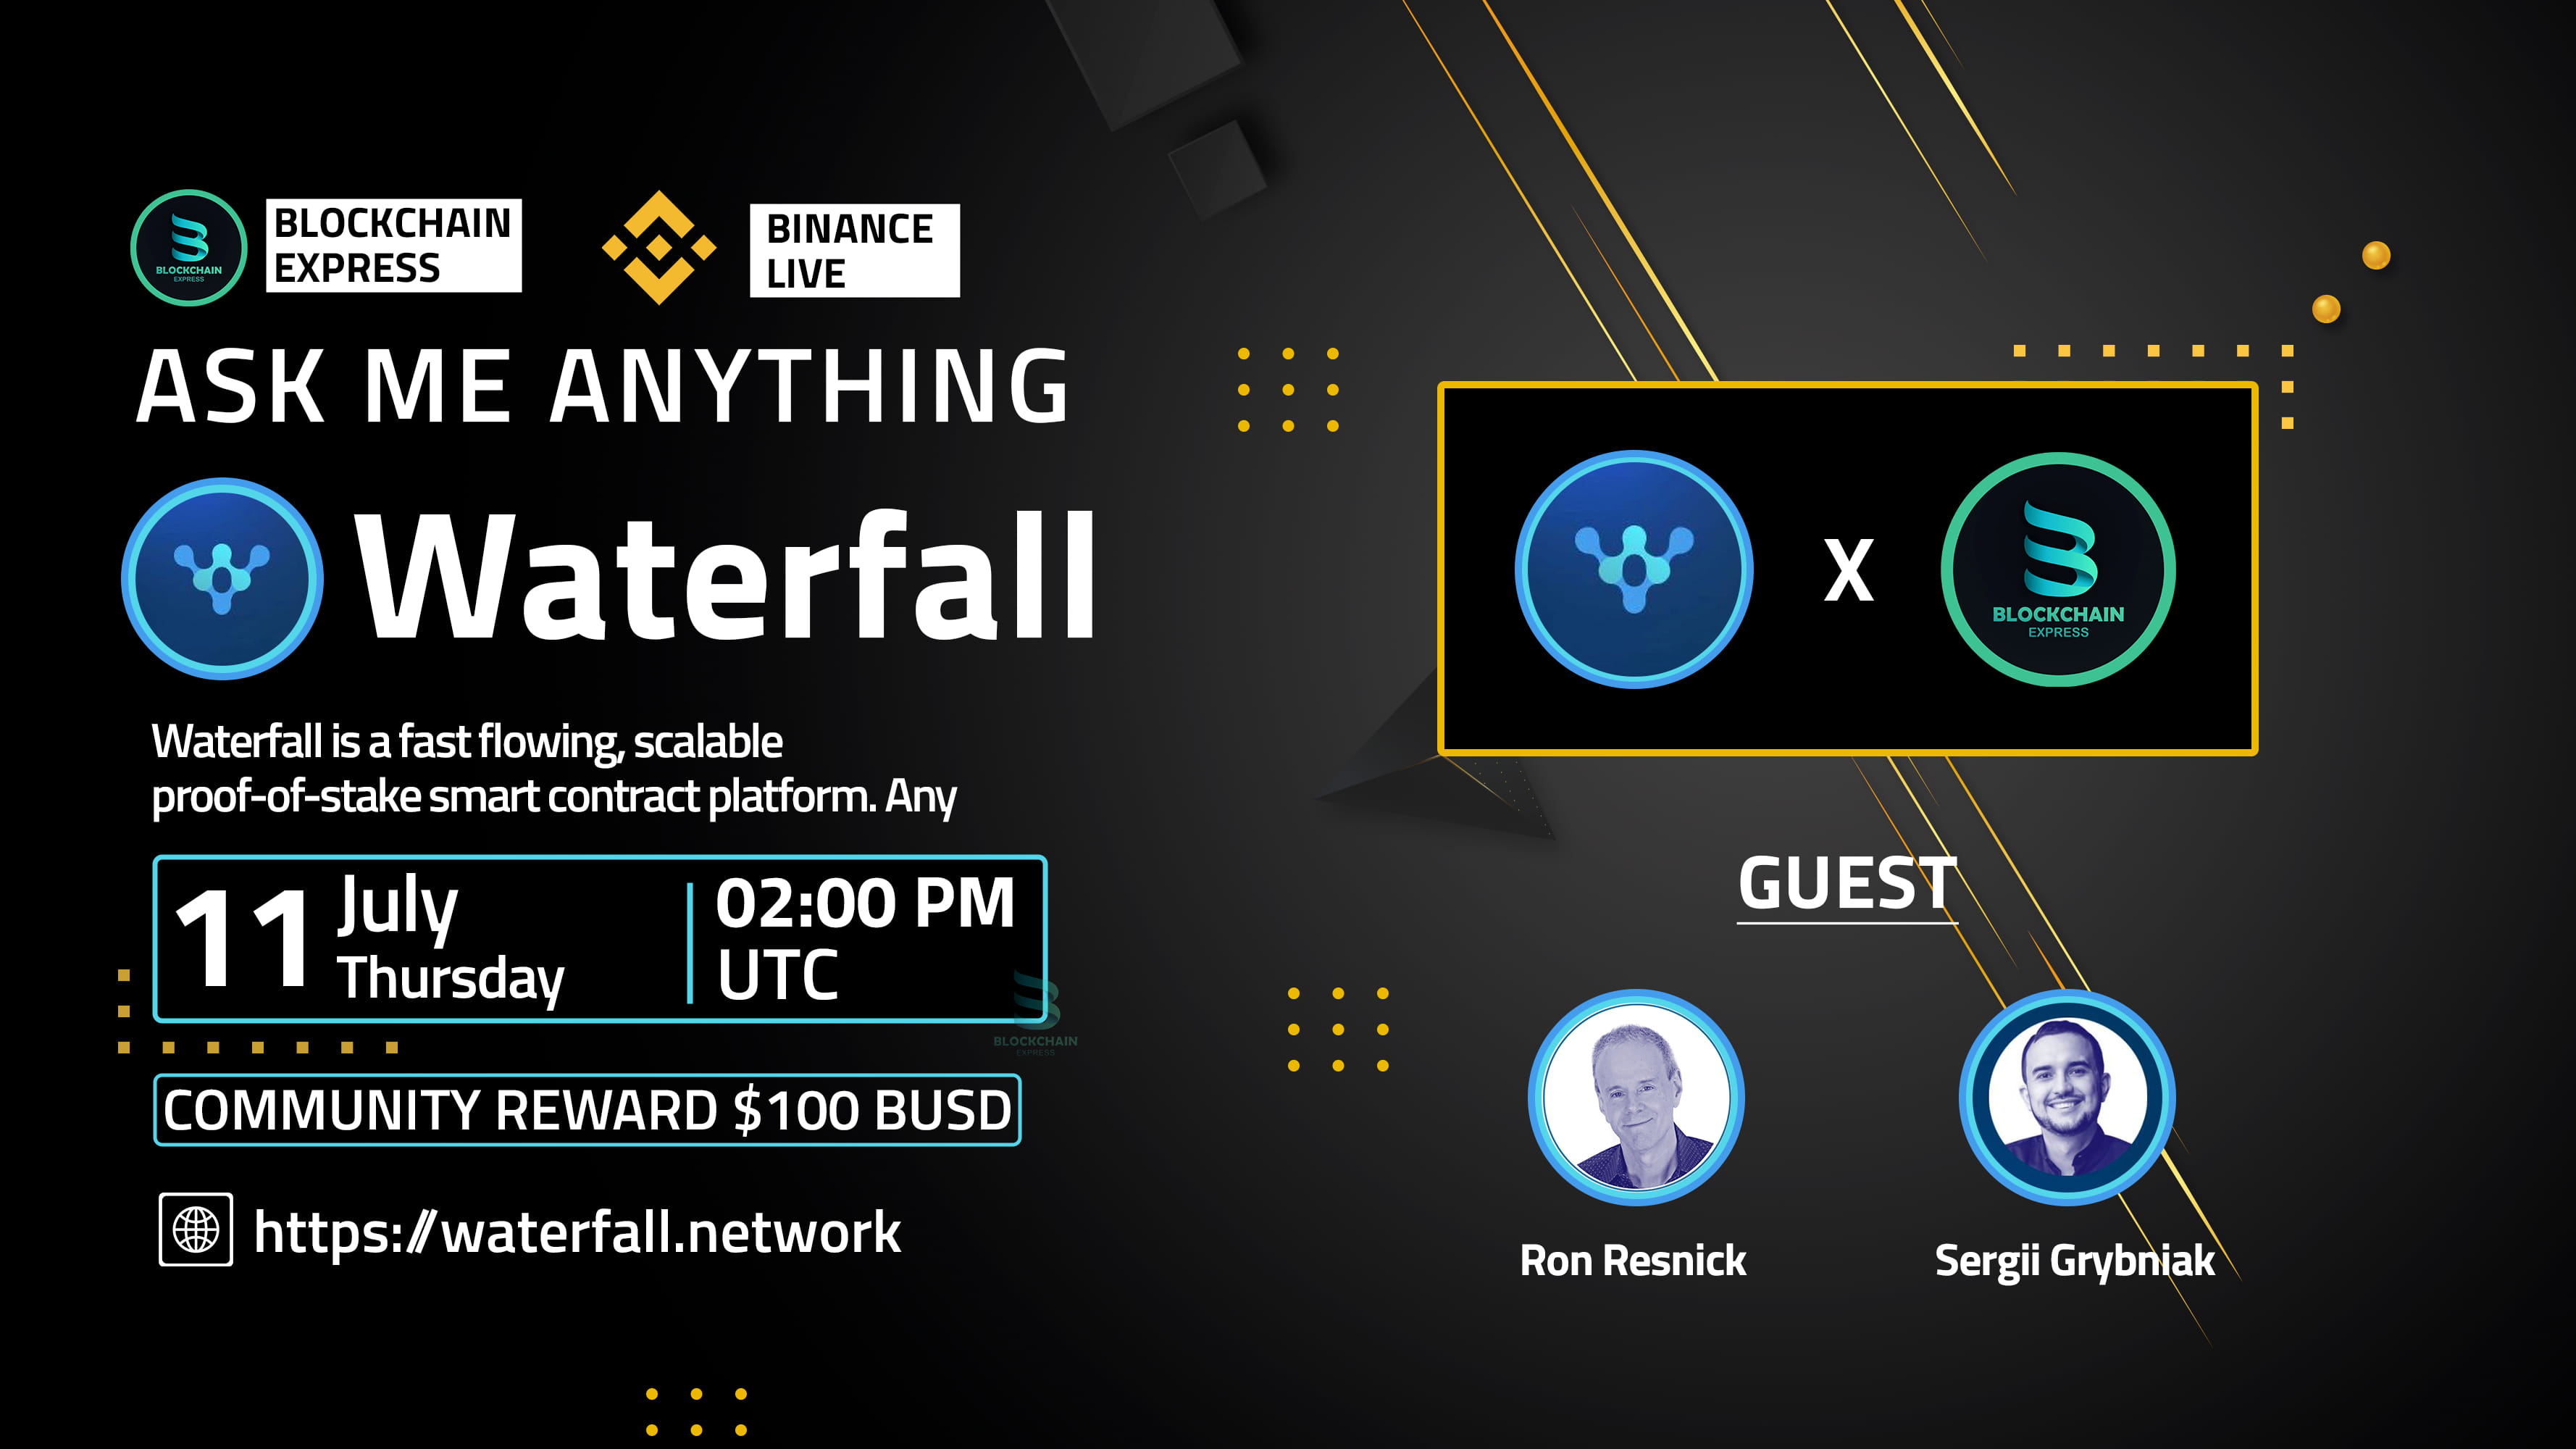 ₿lockchain Express will be hosting an 2nd AMA session with" Waterfall "